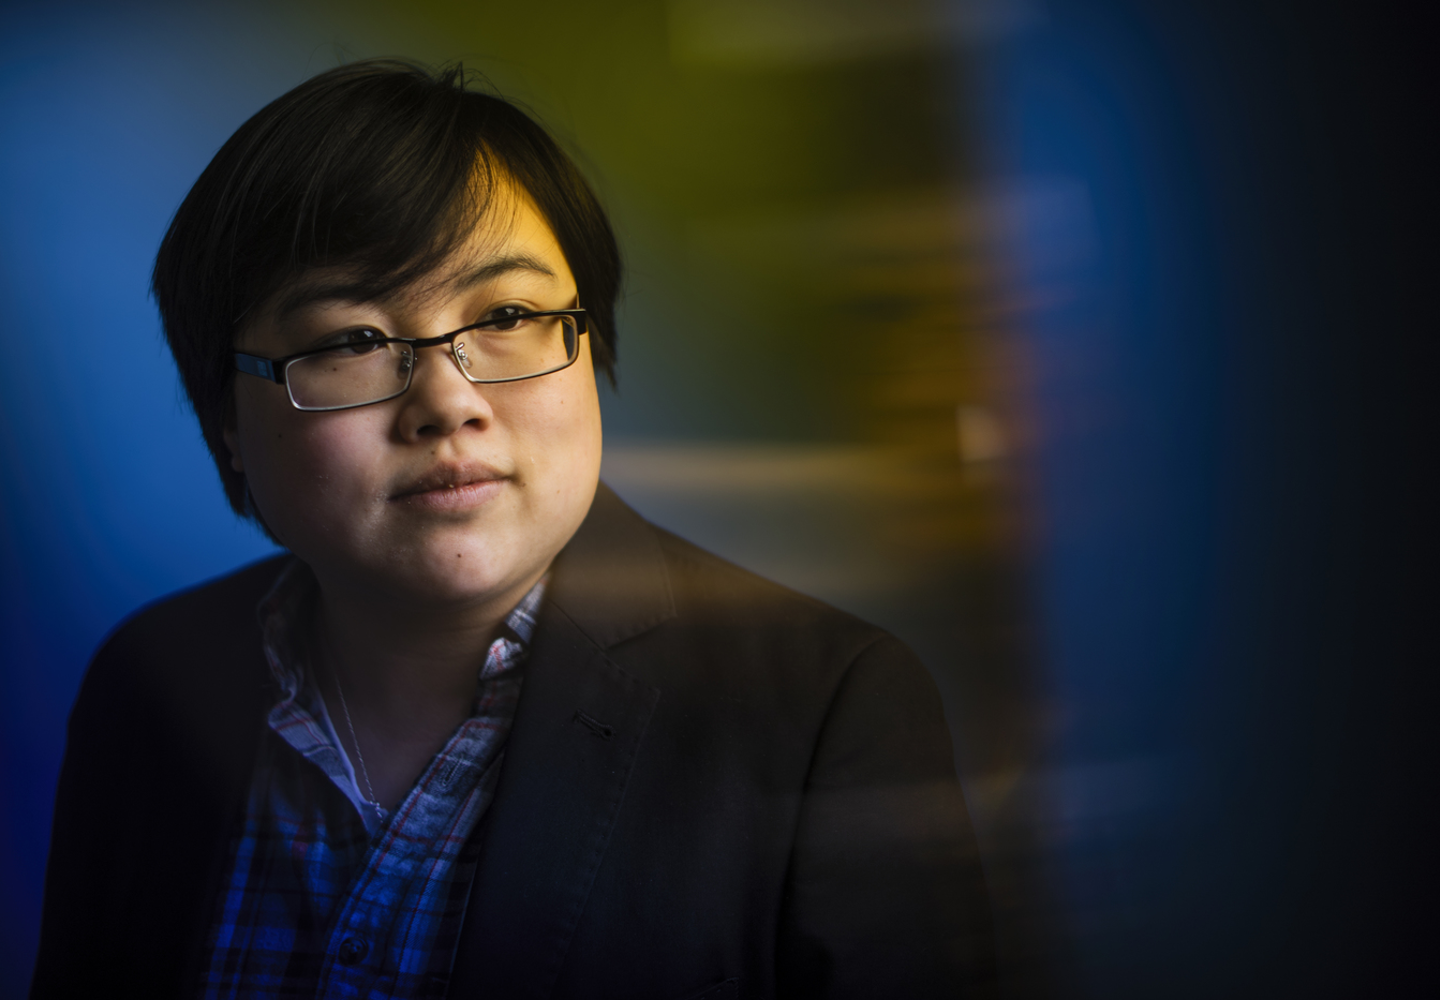 Photo: Headshot of Lydia Brown, young East Asian person, with short black hair, wearing glasses, a plaid shirt, and black jacket. They are looking in the distance, posed against a stylized blue dramatic background. Photo by Adam Glanzman.